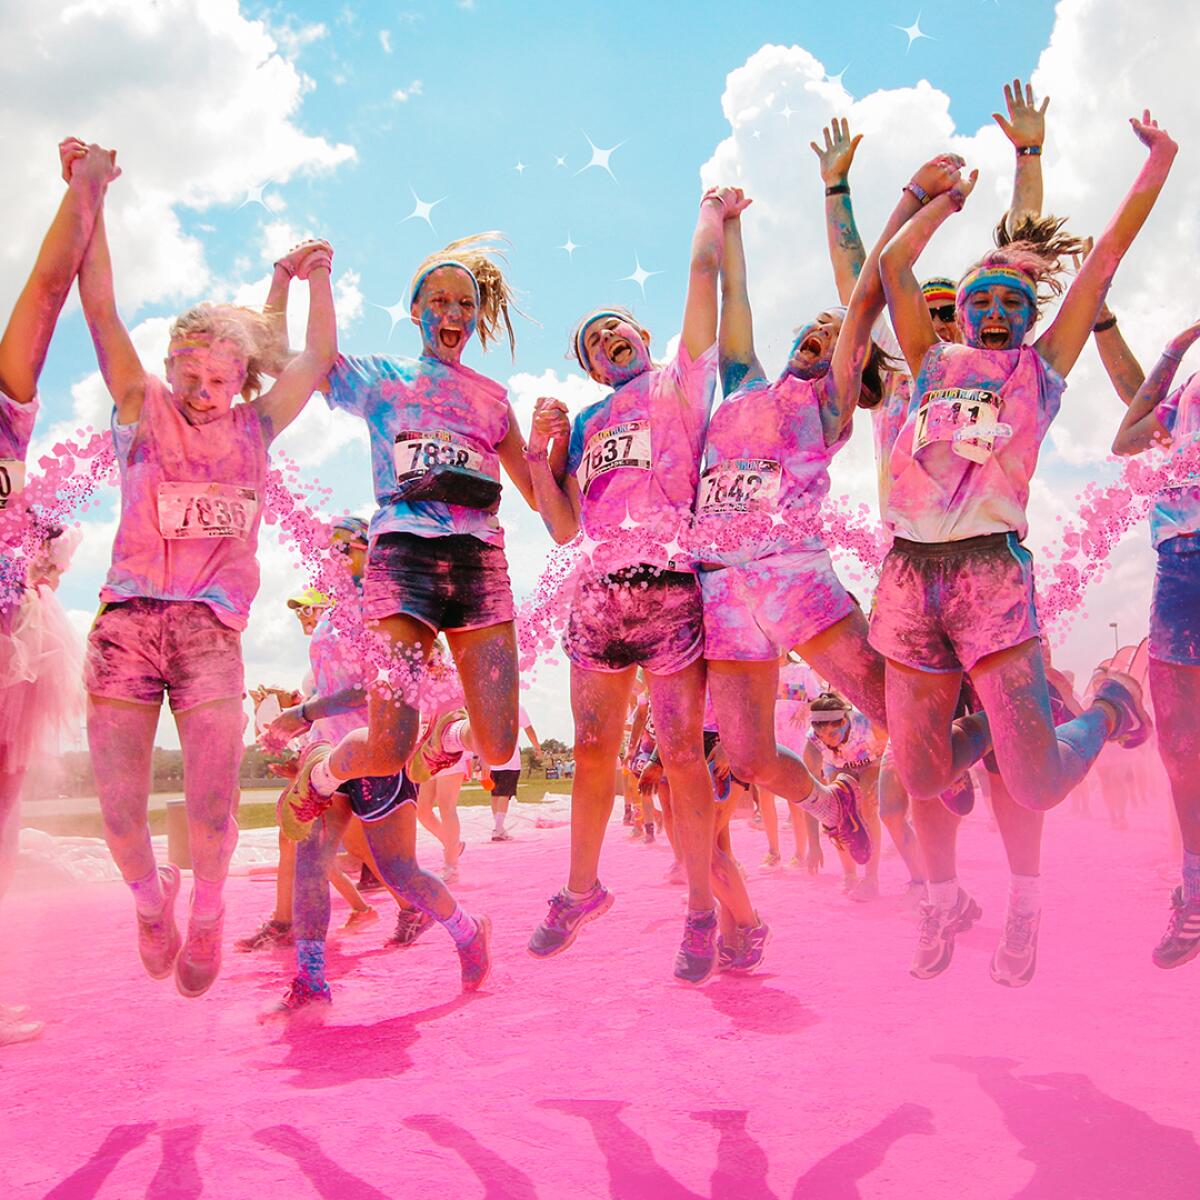 A group of people covered in pink chalk jump in the air.